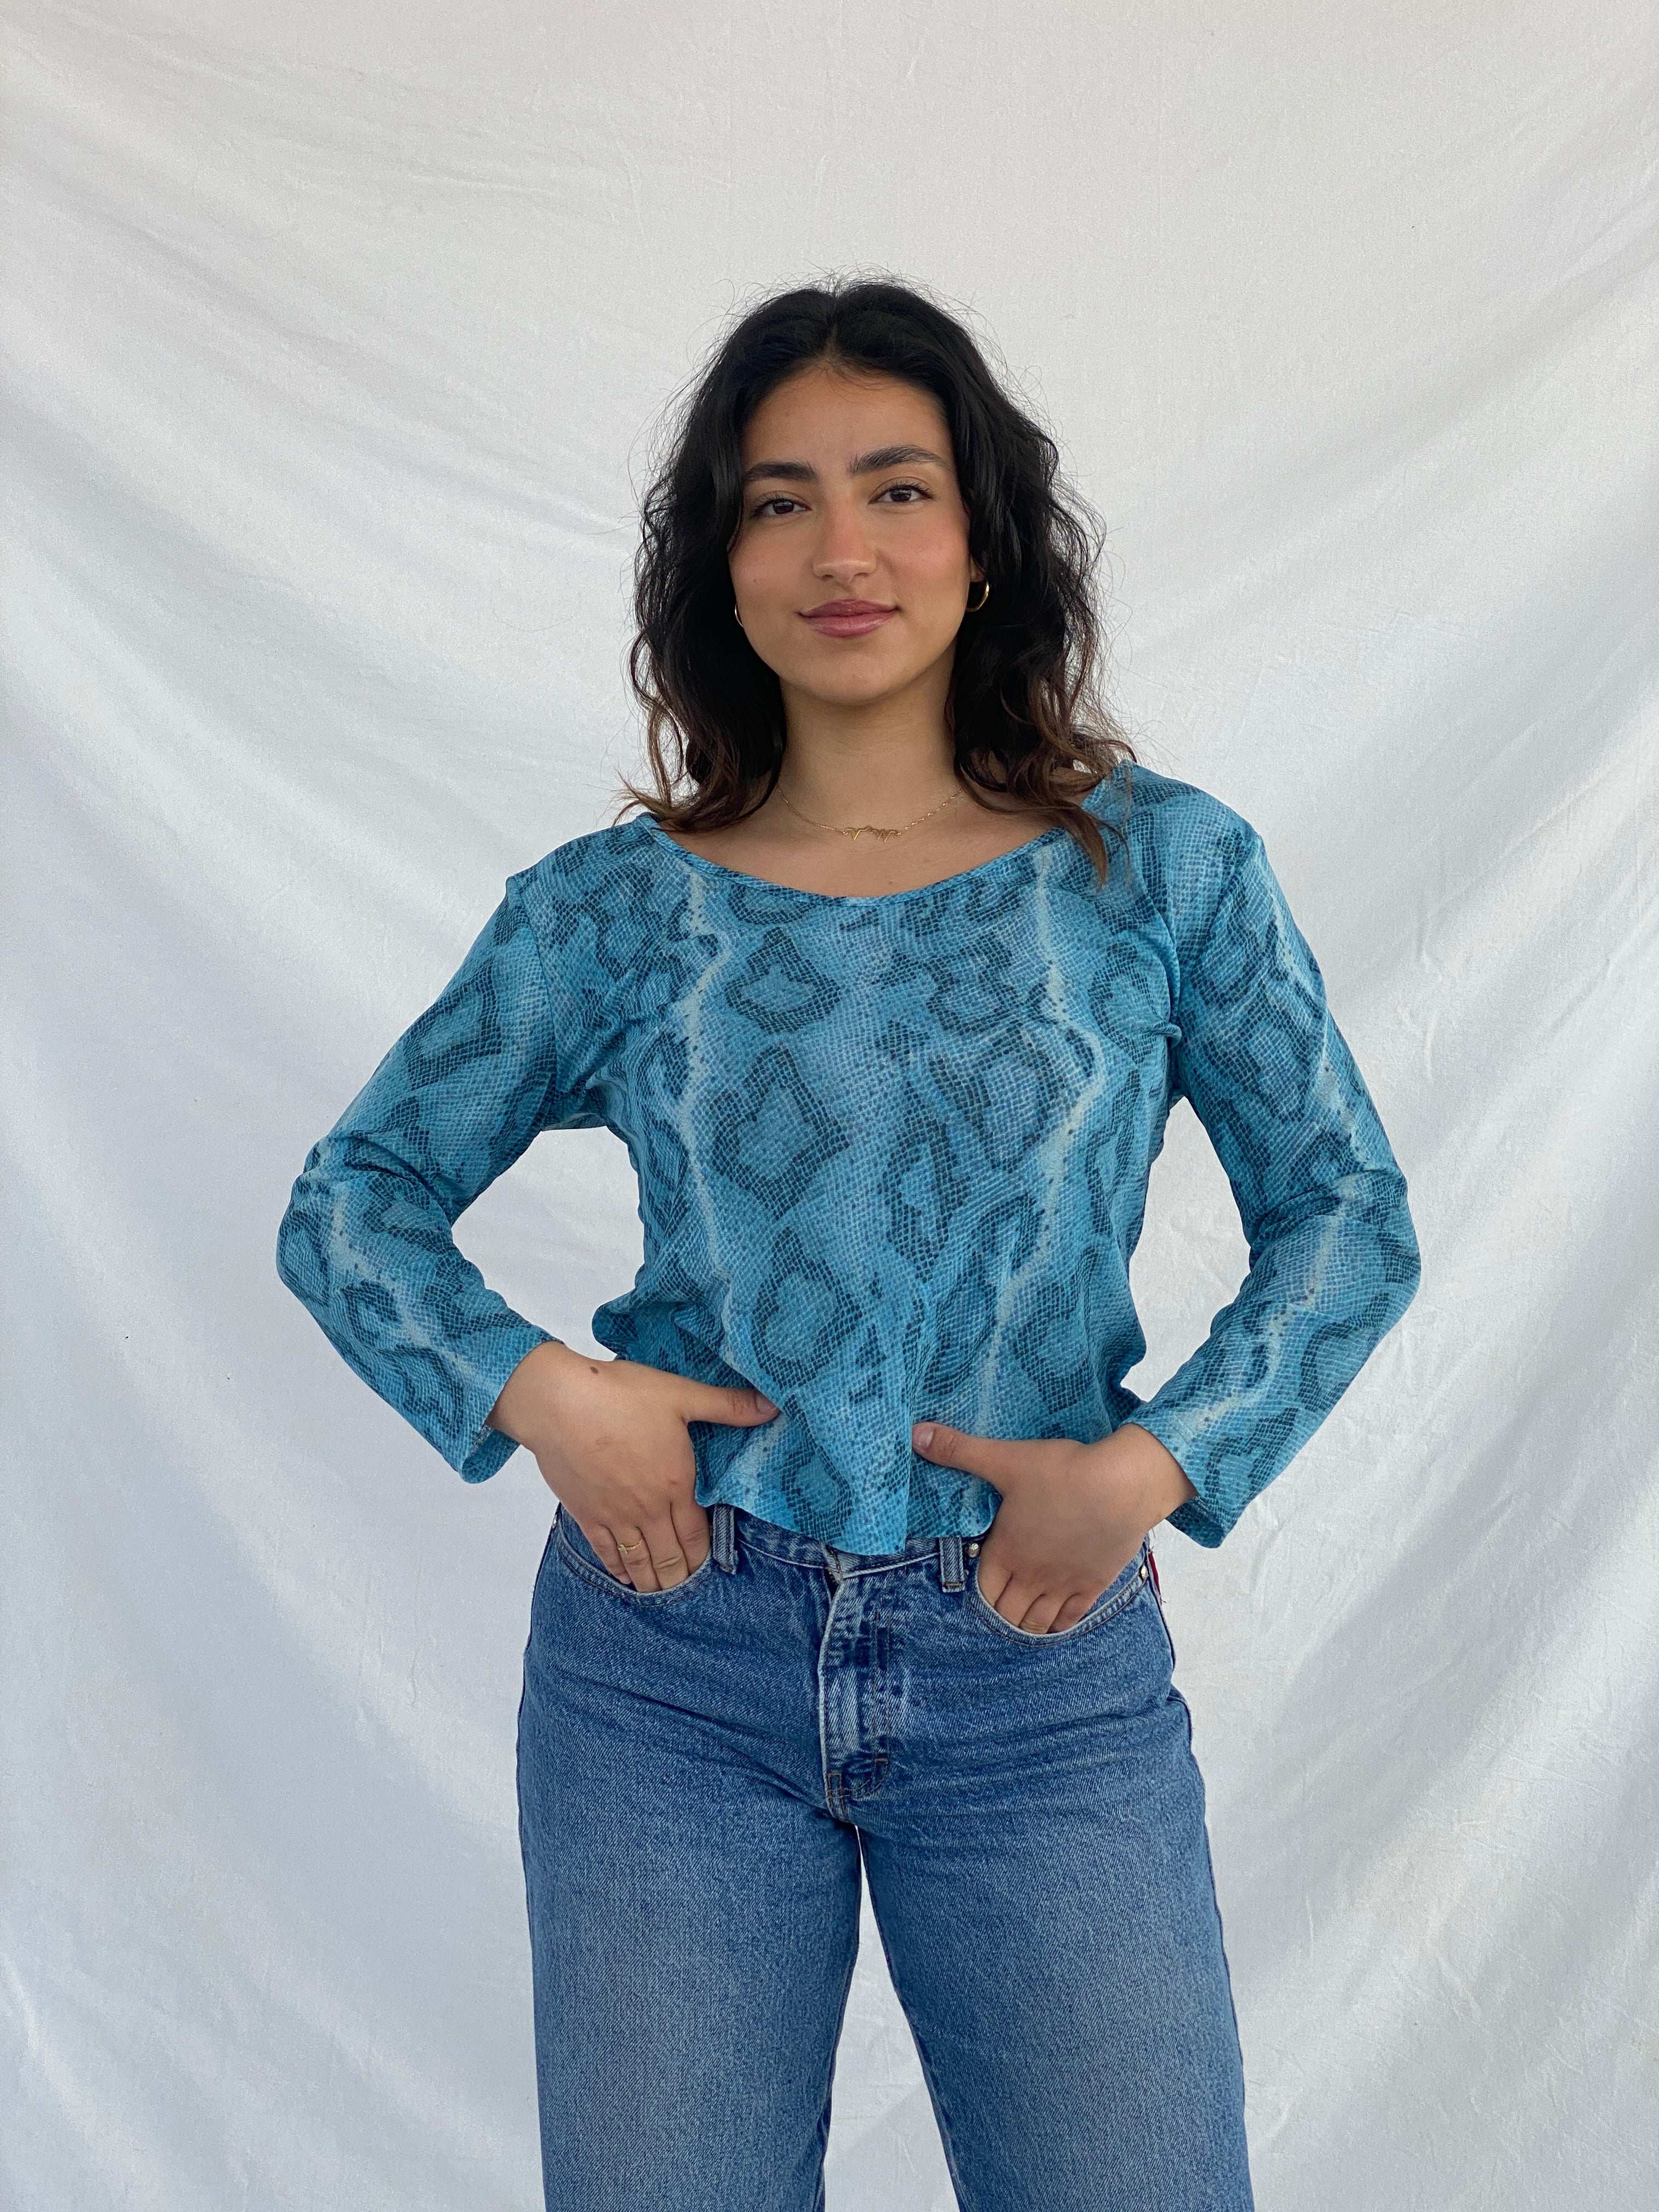 Vintage Cafe Pacific Full Sleeve Top - Size L - Balagan Vintage Mesh Top 00s, 90s, Lana, mesh top, NEW IN, summer